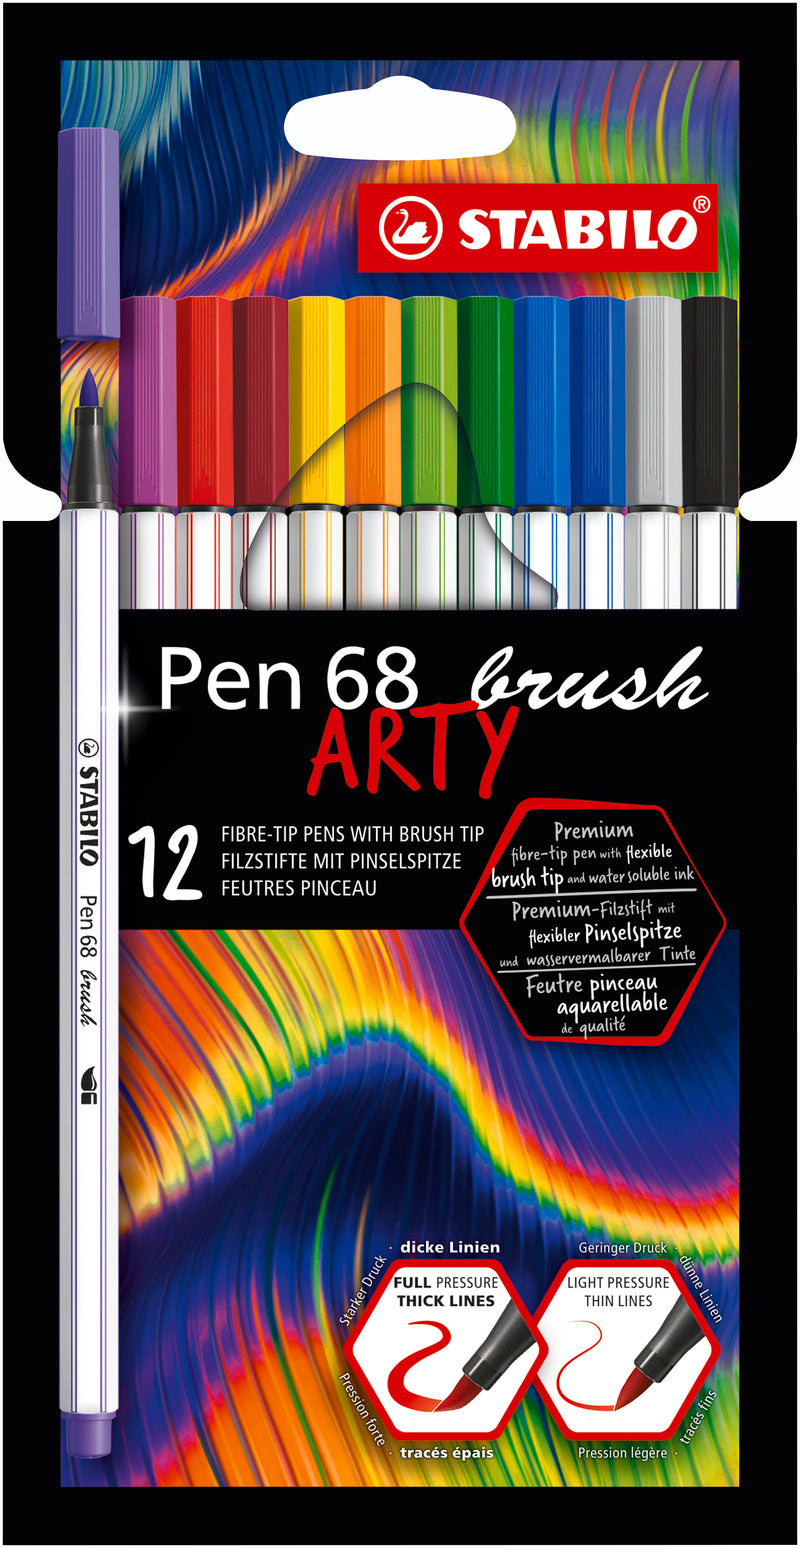 STABILO Pen 68 Brush ARTY - Pack of 12 - Assorted Colours